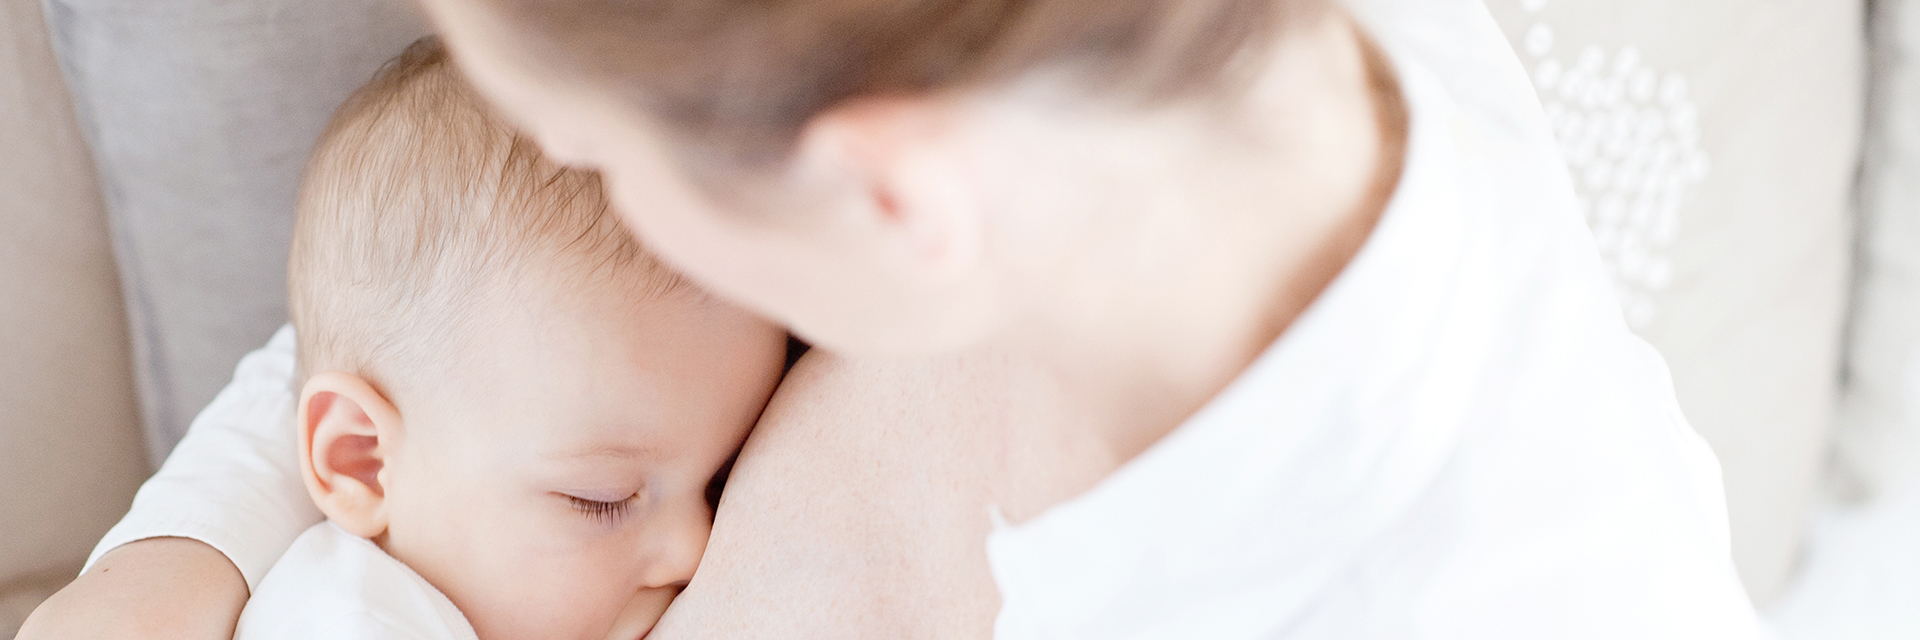 Breastfeeding When Your Baby Is Sick